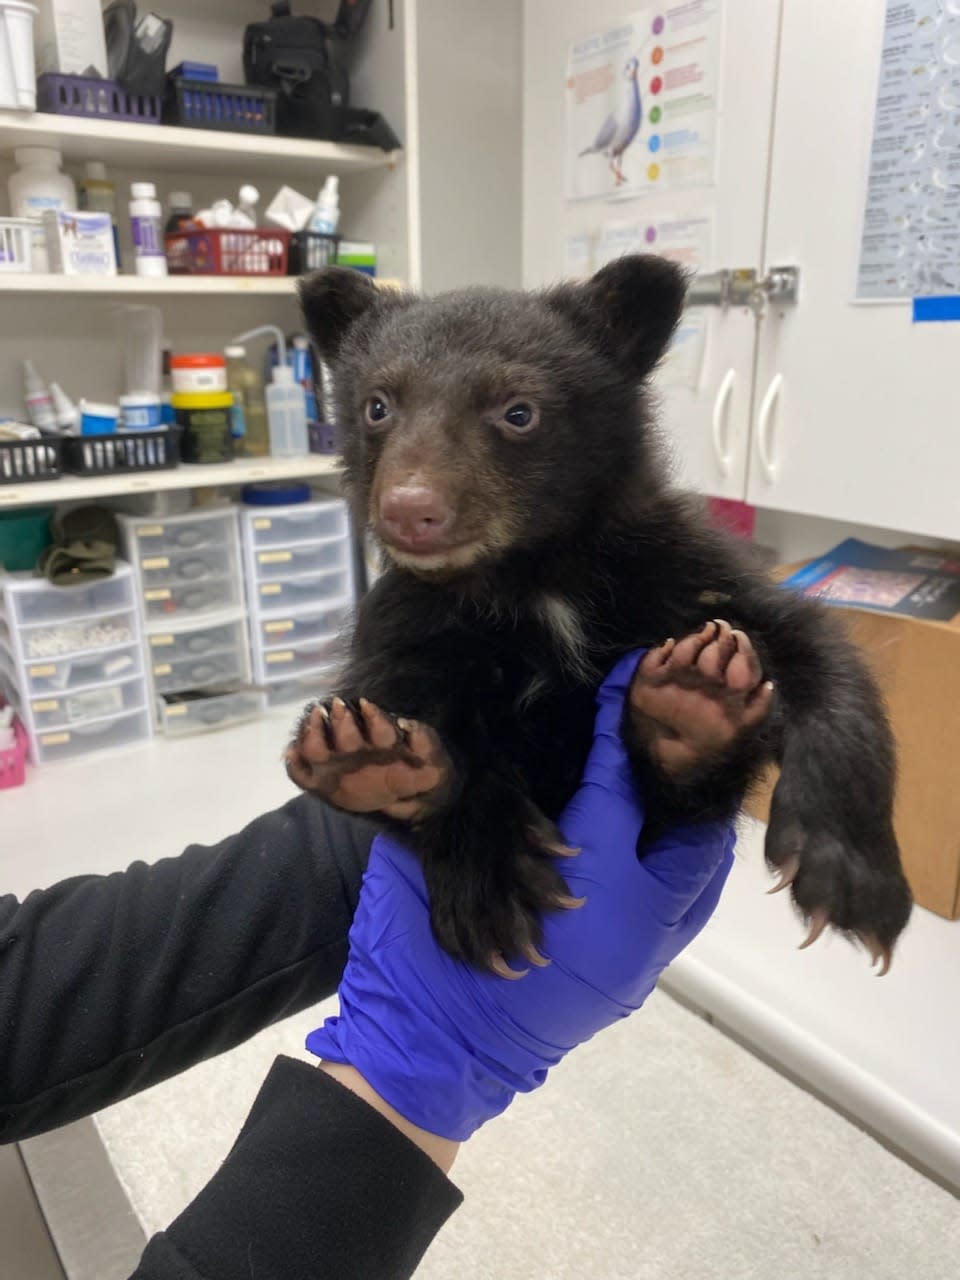 Jonathan Evison received a photo from West Sound Wildlife Shelter on Bainbridge Island of the black bear cub he found in rural Clallam County.